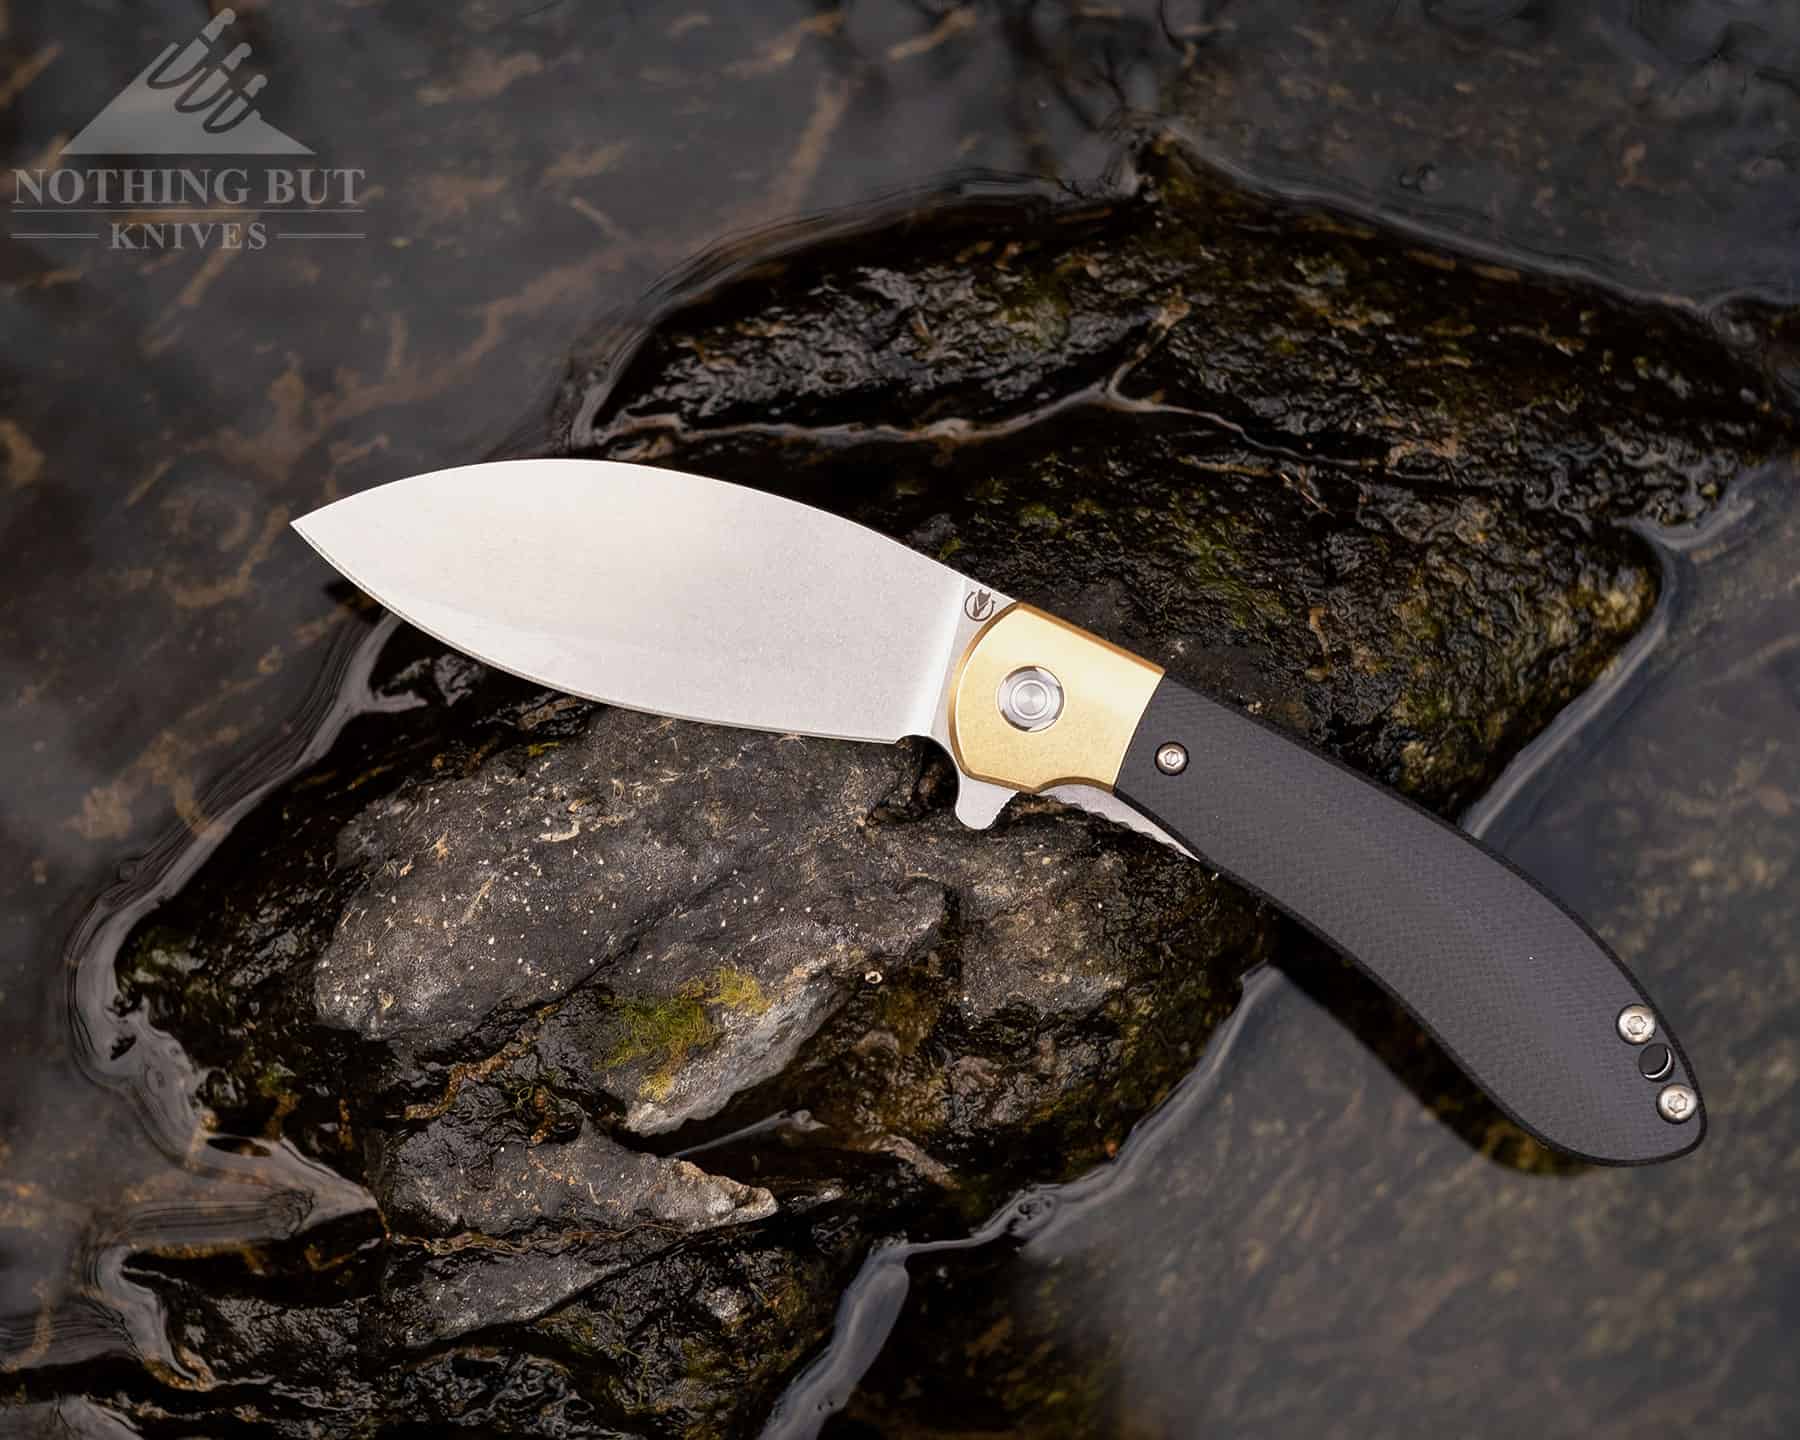 Vosteed Nightshade pocket knife review final image.